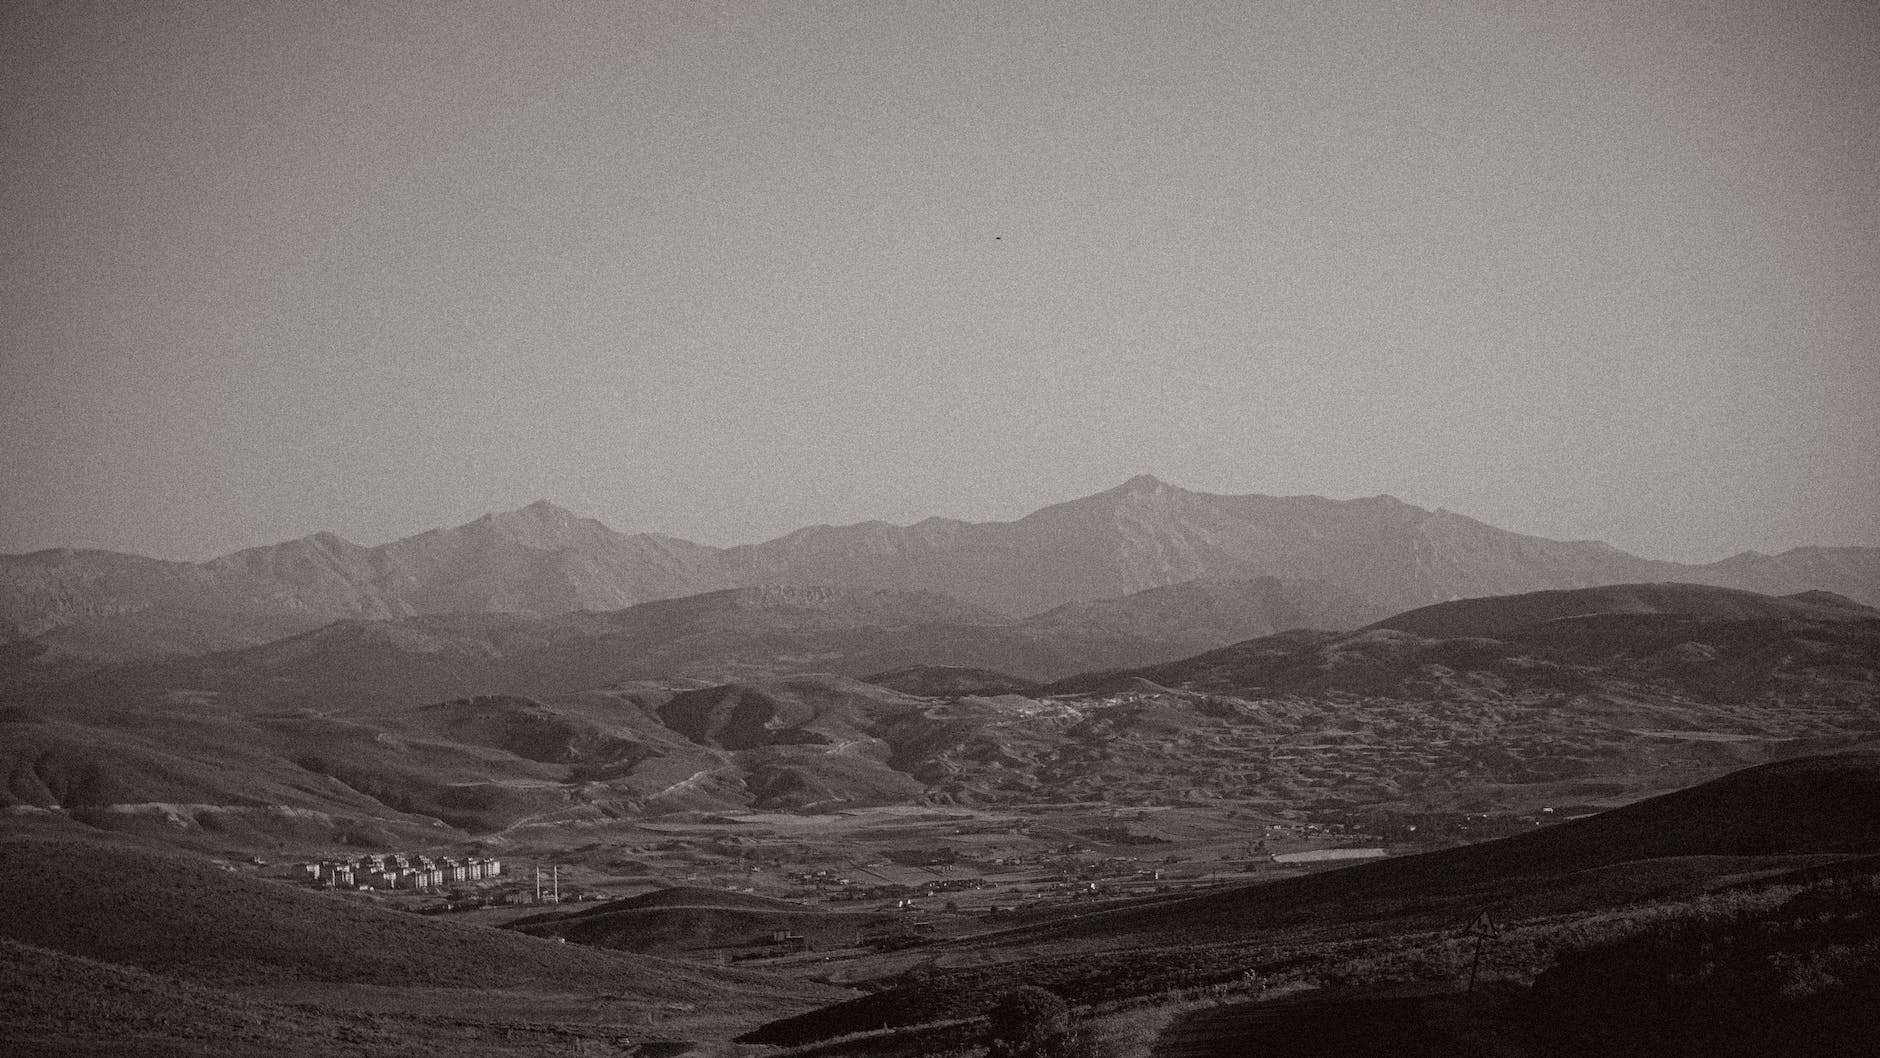 hills on a desert covered with fog in black and white